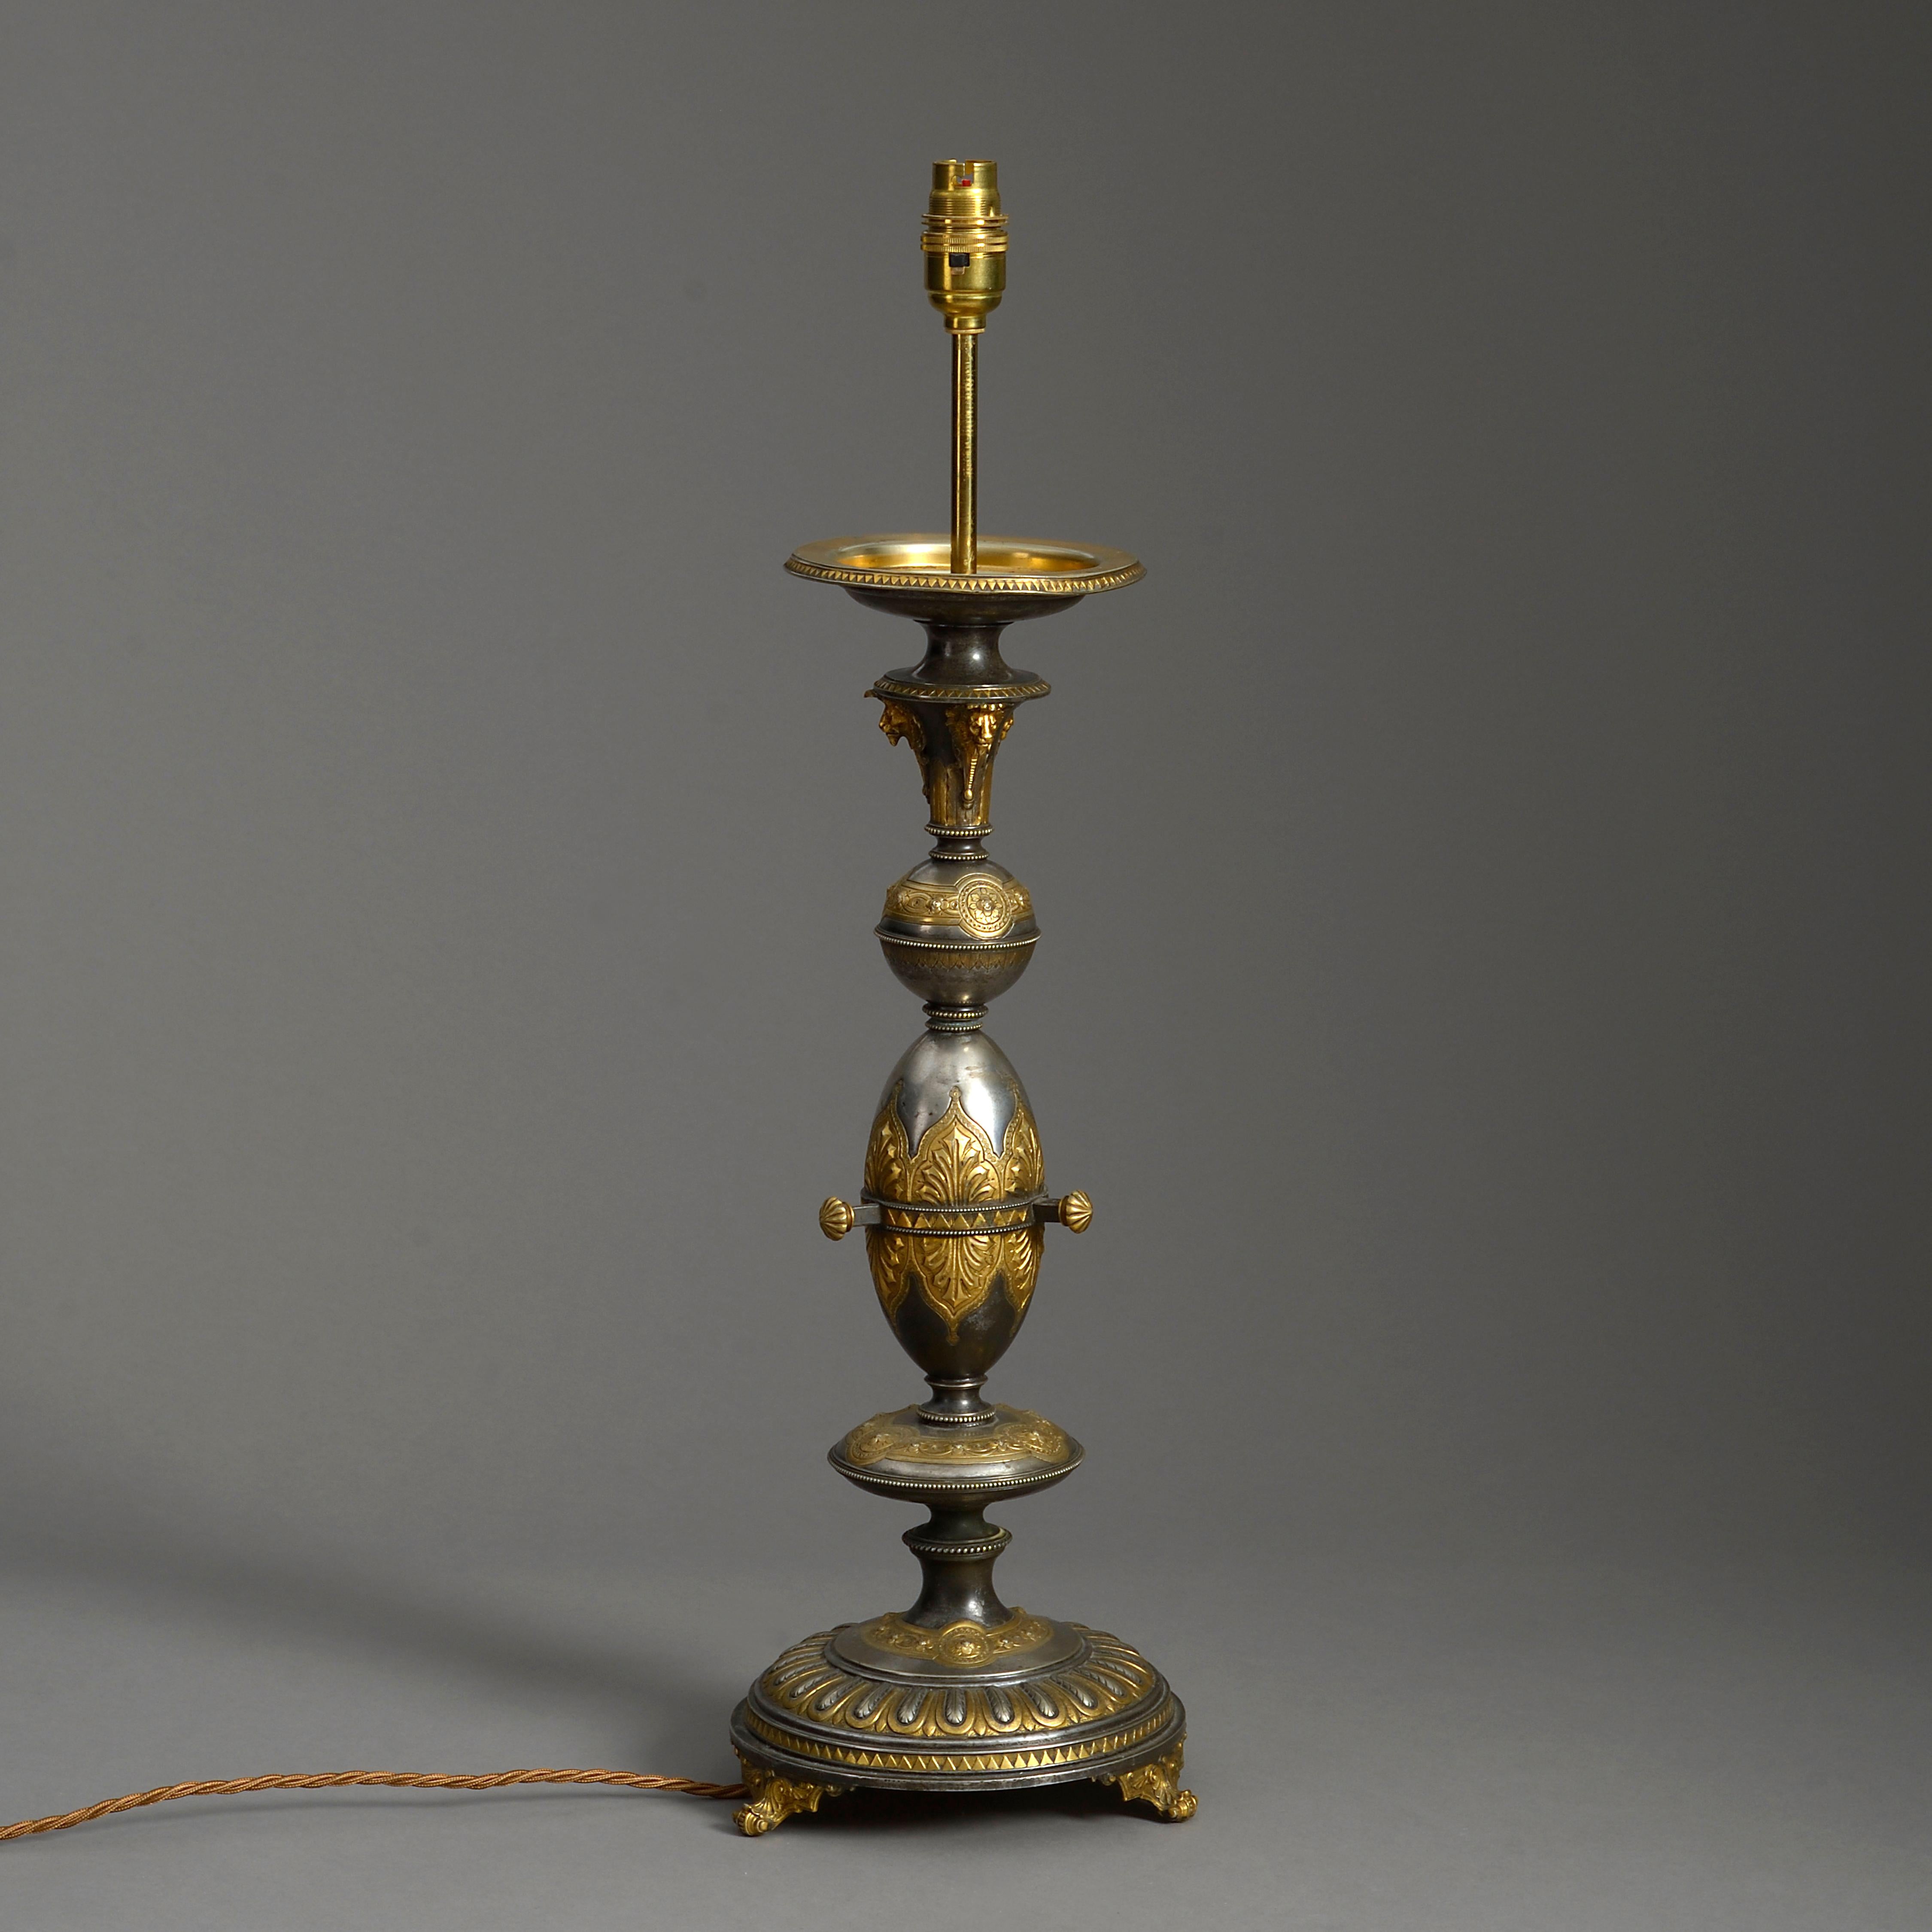 A nineteenth century cut steel and gilded steel column lamp, decorated with stylised lion masks, palmettes, beading and gadrooning.

The top stamped with registration mark.

Height refers to antique elements (not including electrical